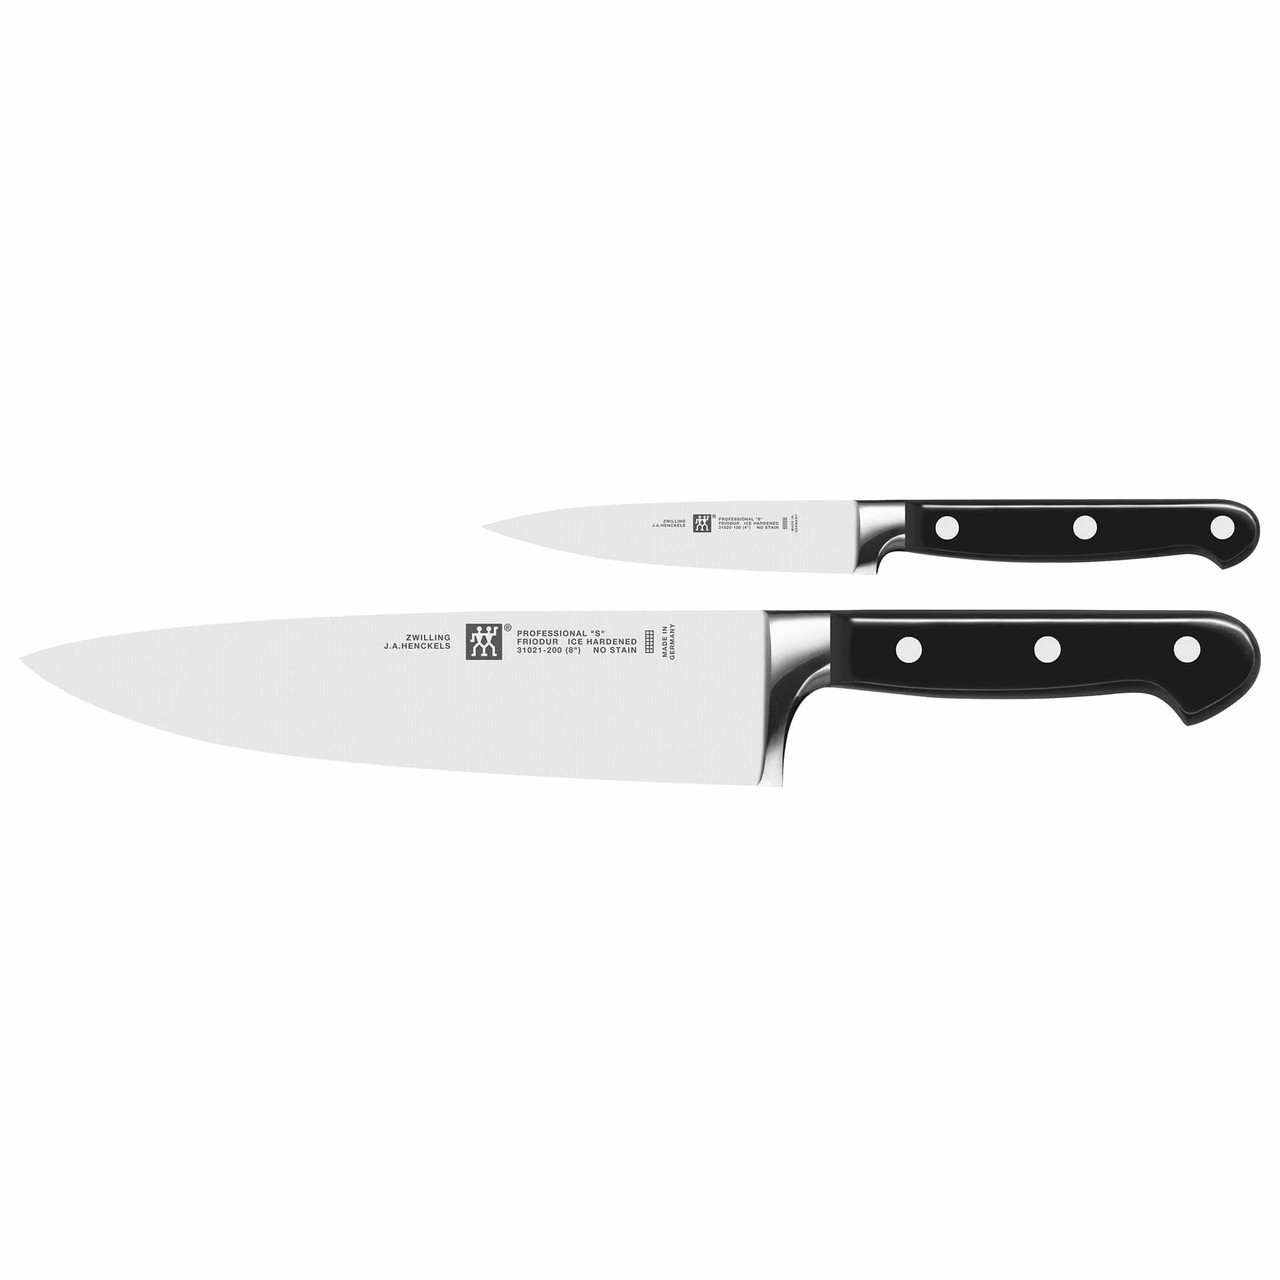 https://cdn11.bigcommerce.com/s-hccytny0od/images/stencil/1280x1280/products/614/708/zwilling-ja-henckels-professional-s-2-piece-chefs-set__12059.1509663989.jpg?c=2?imbypass=on